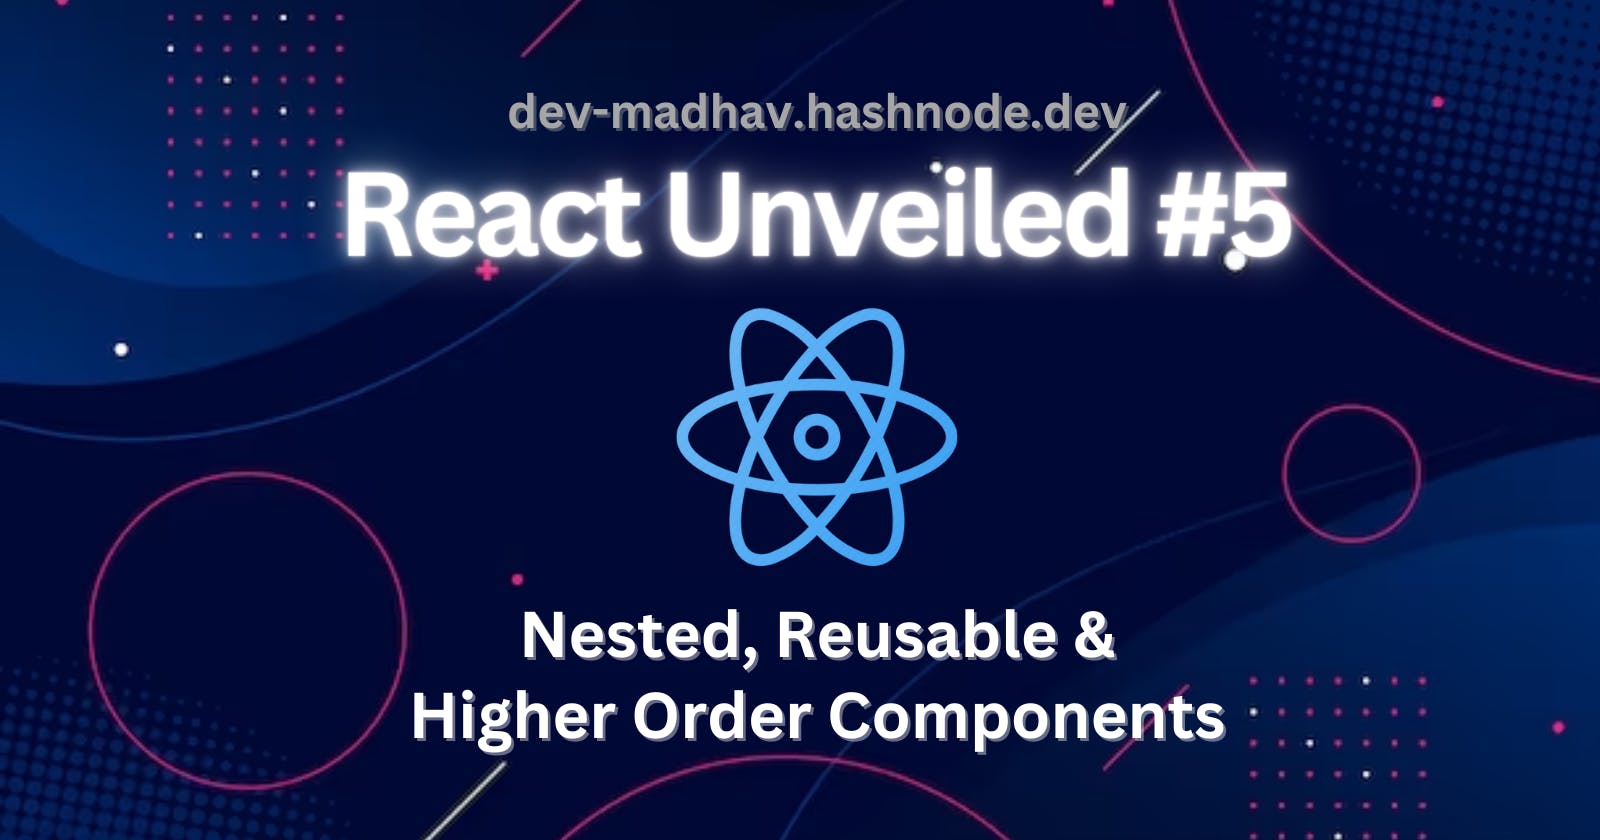 React Unveiled #5 - Nested, Reusable & HO Components.